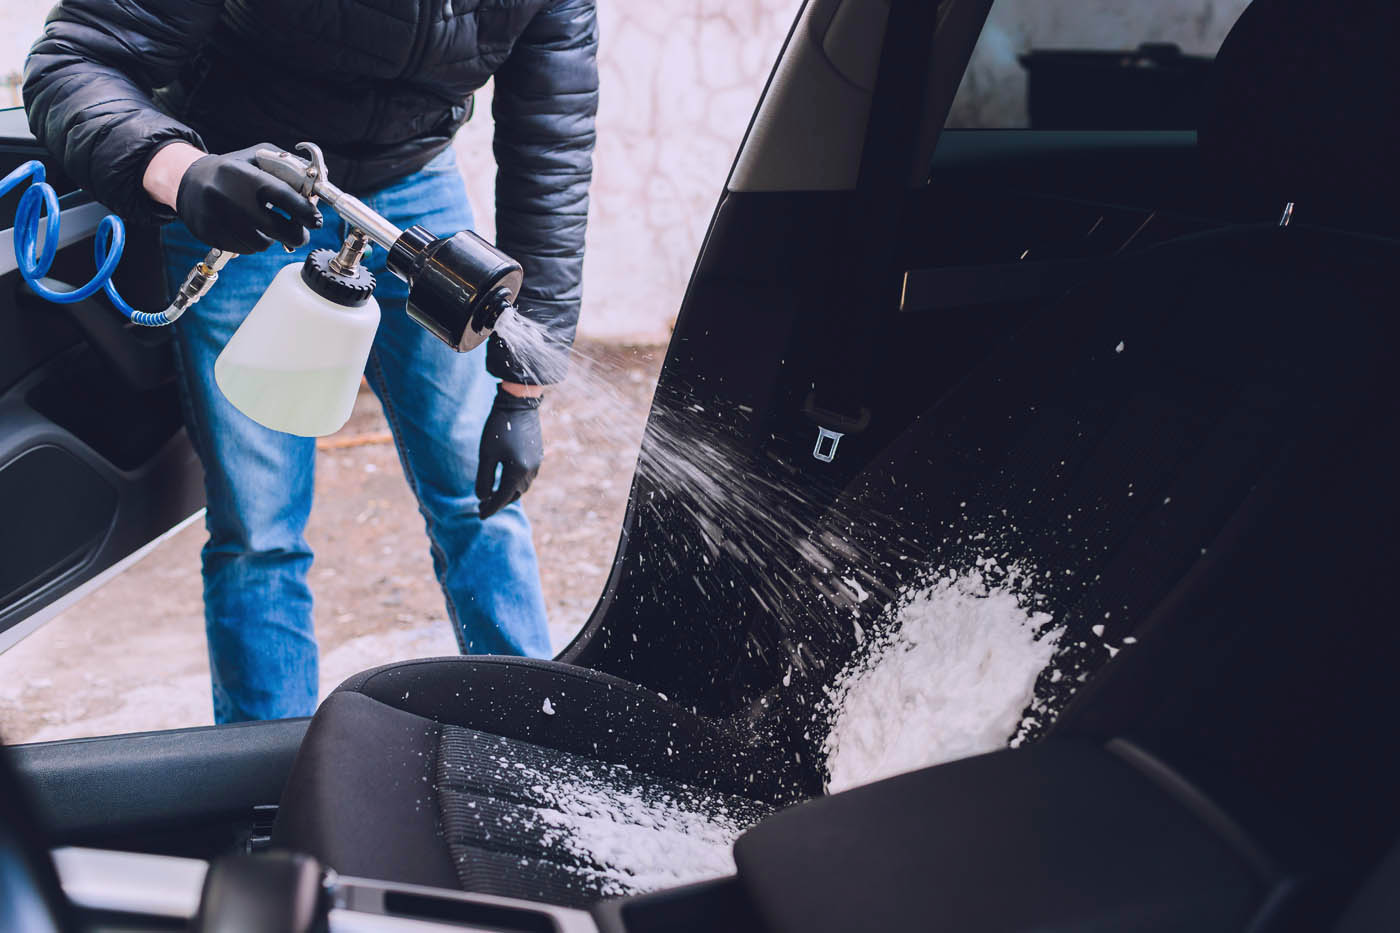 Dapper Pros has odor elimination services to keep your car smelling fresh.